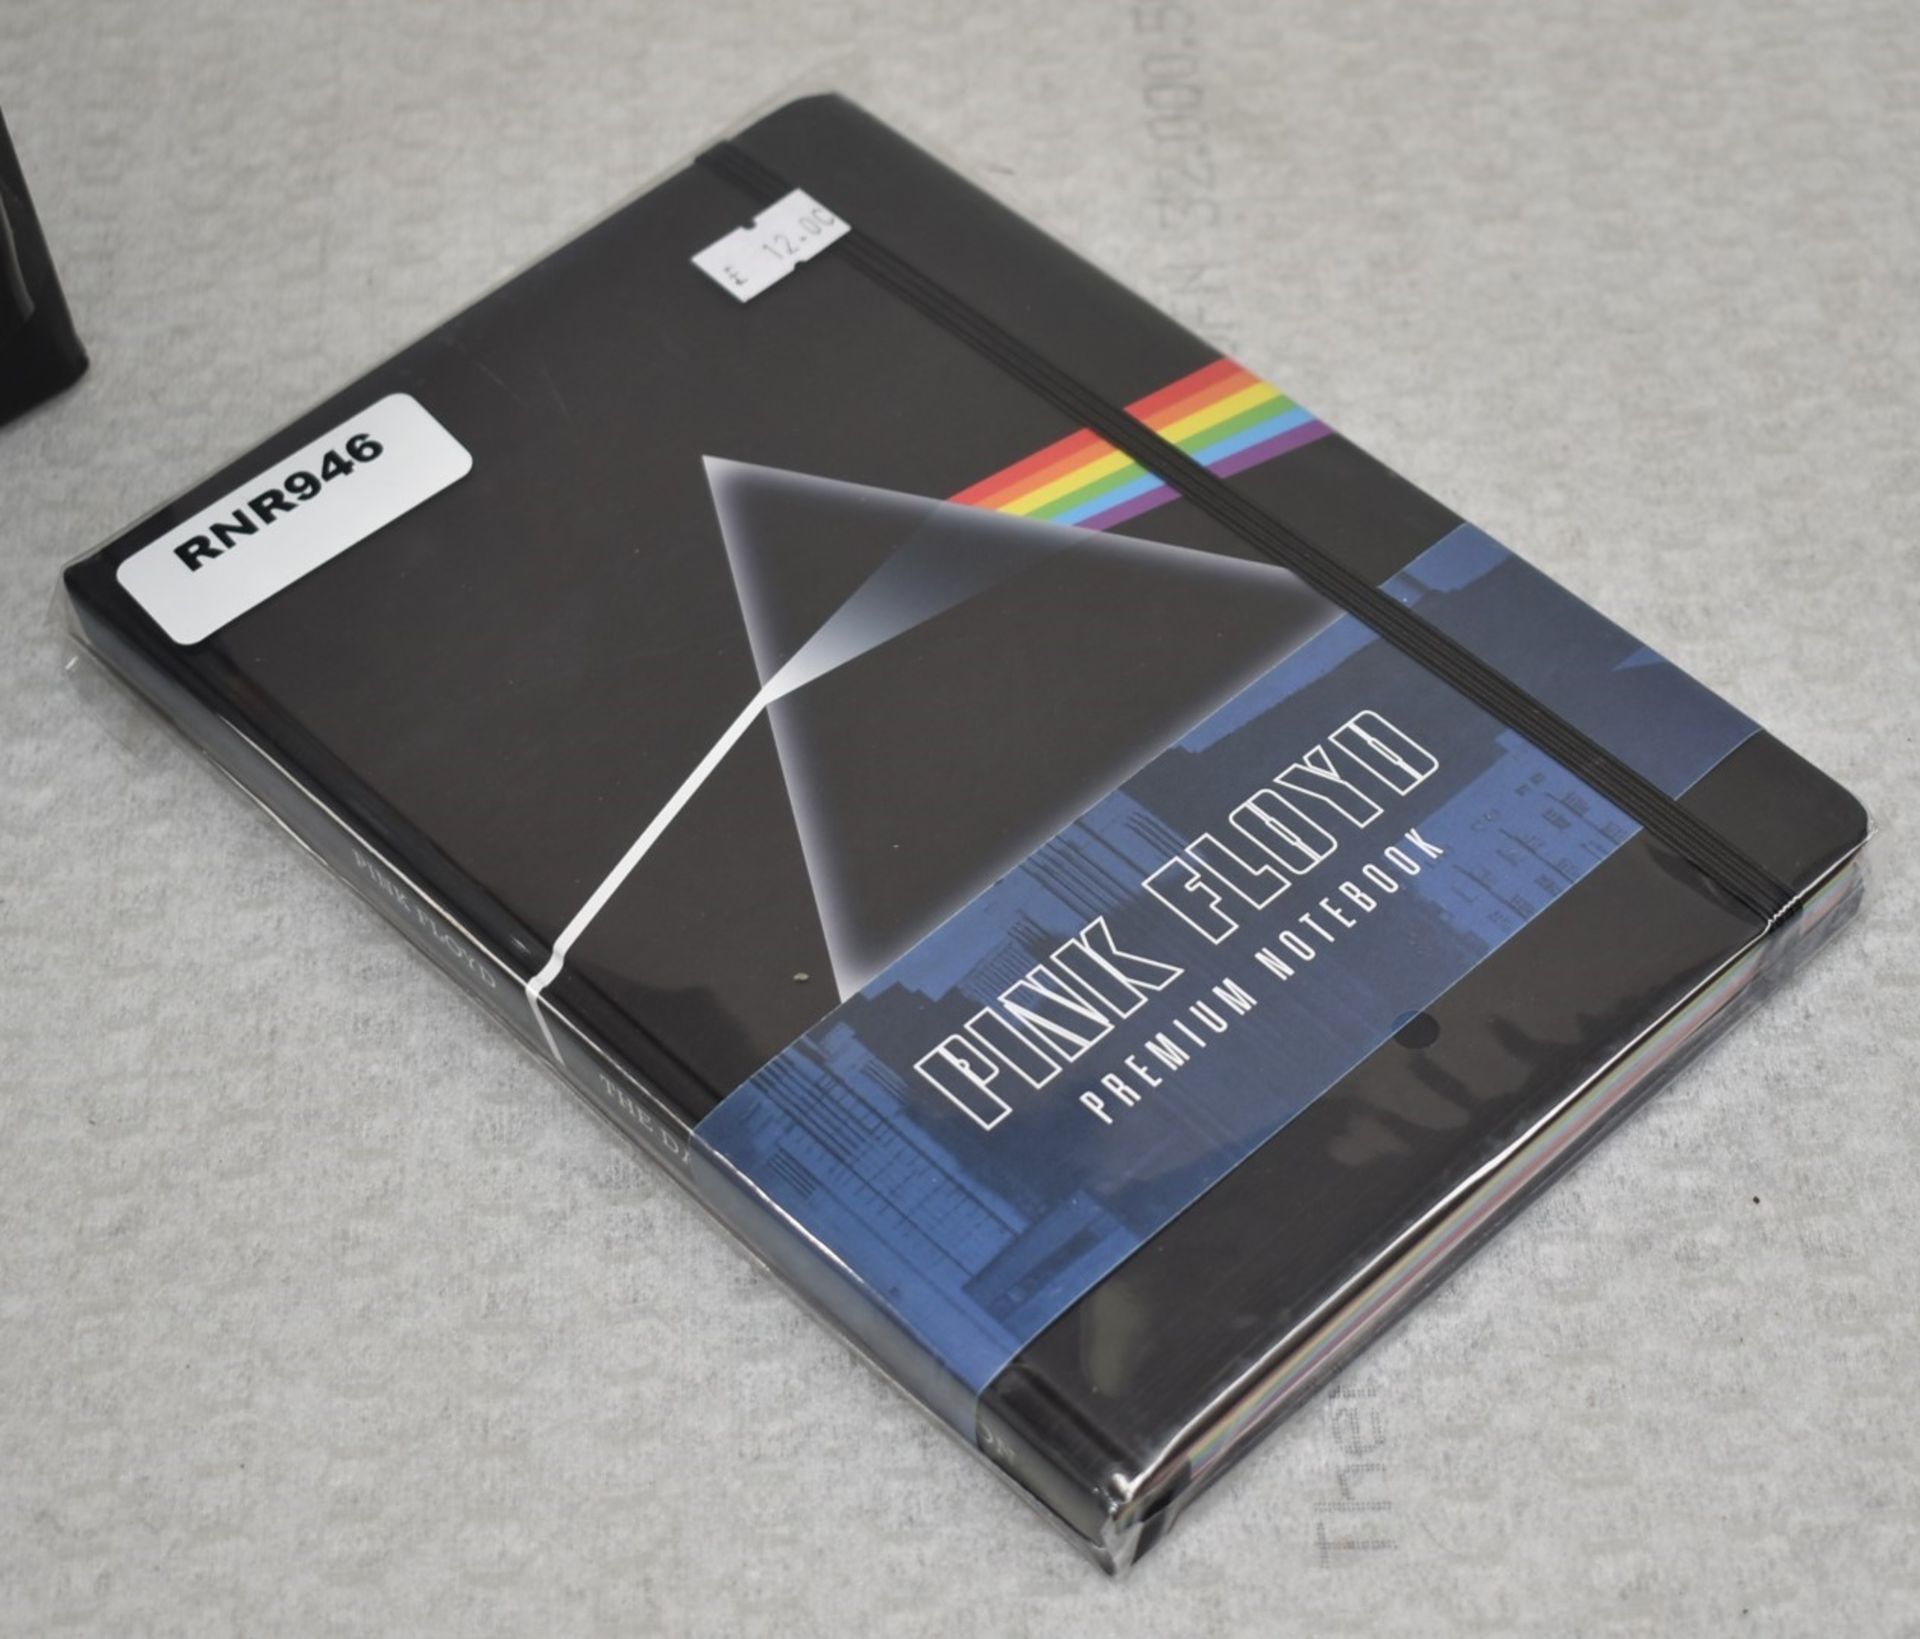 4 x Pink Floyd Premium A5 Notebooks - Officially Licensed Merchandise - New & Sealed - Ref: RR946 - Image 2 of 5